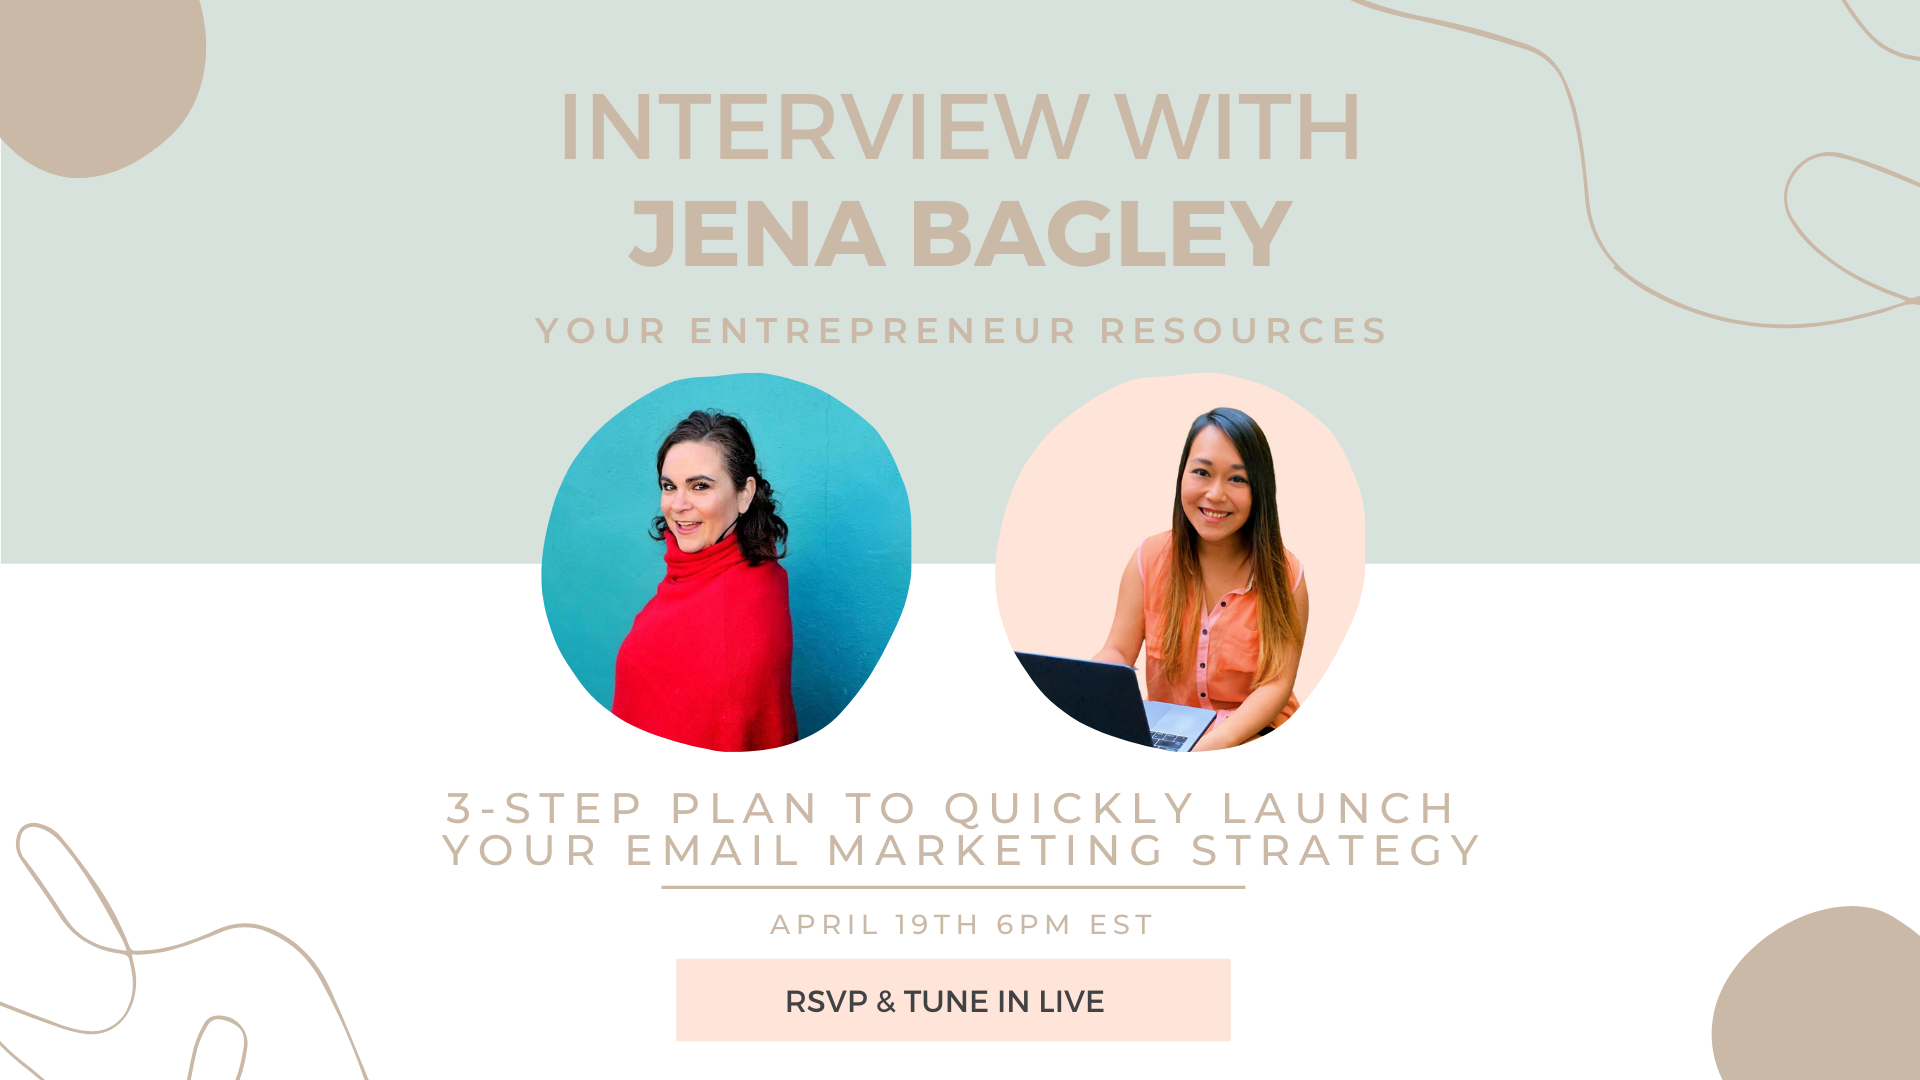 3-Step Plan to Quickly Launch your Email Marketing Strategy with Jena Bagley